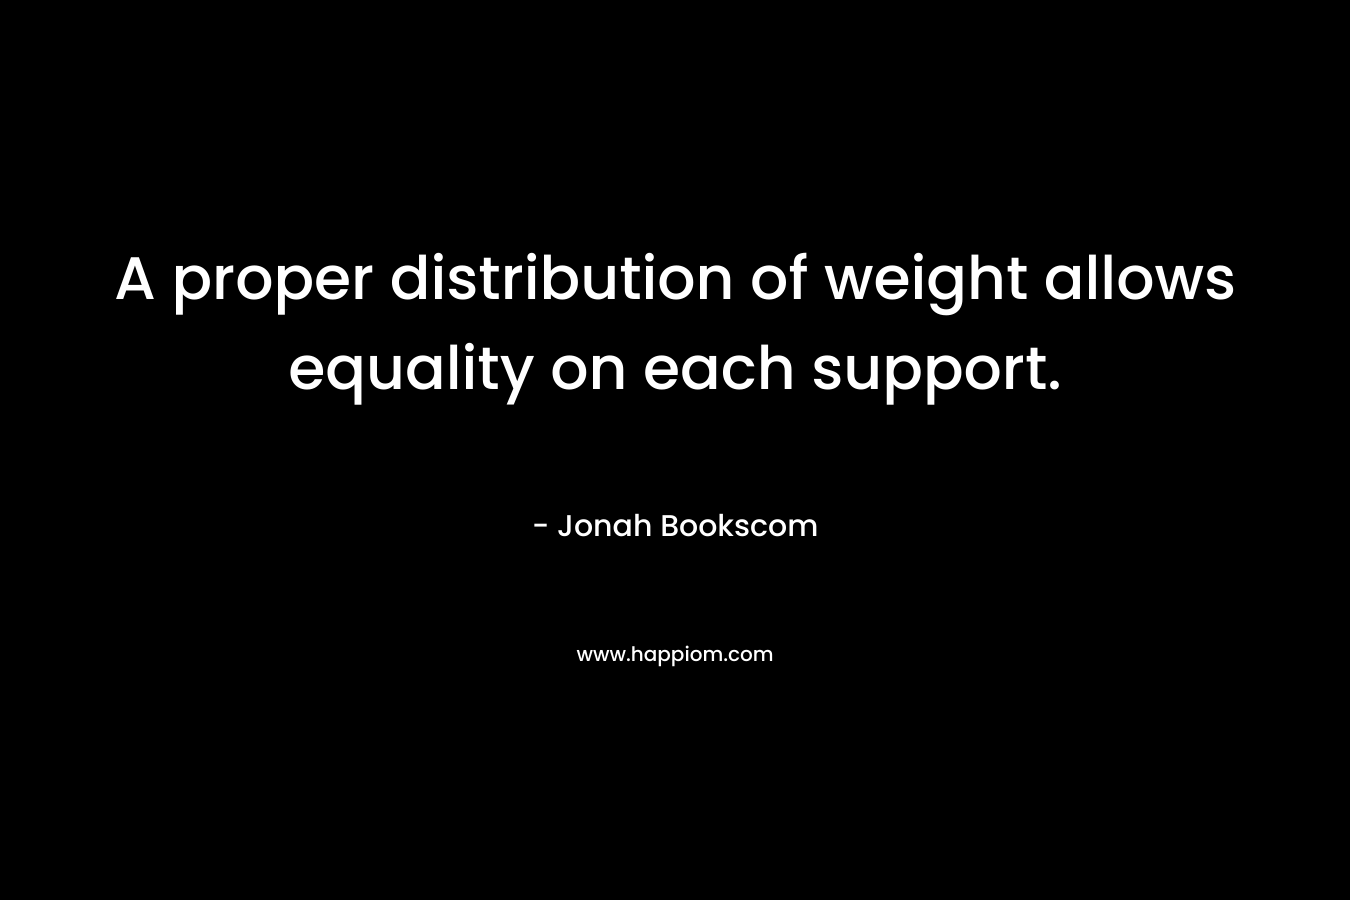 A proper distribution of weight allows equality on each support. – Jonah Bookscom